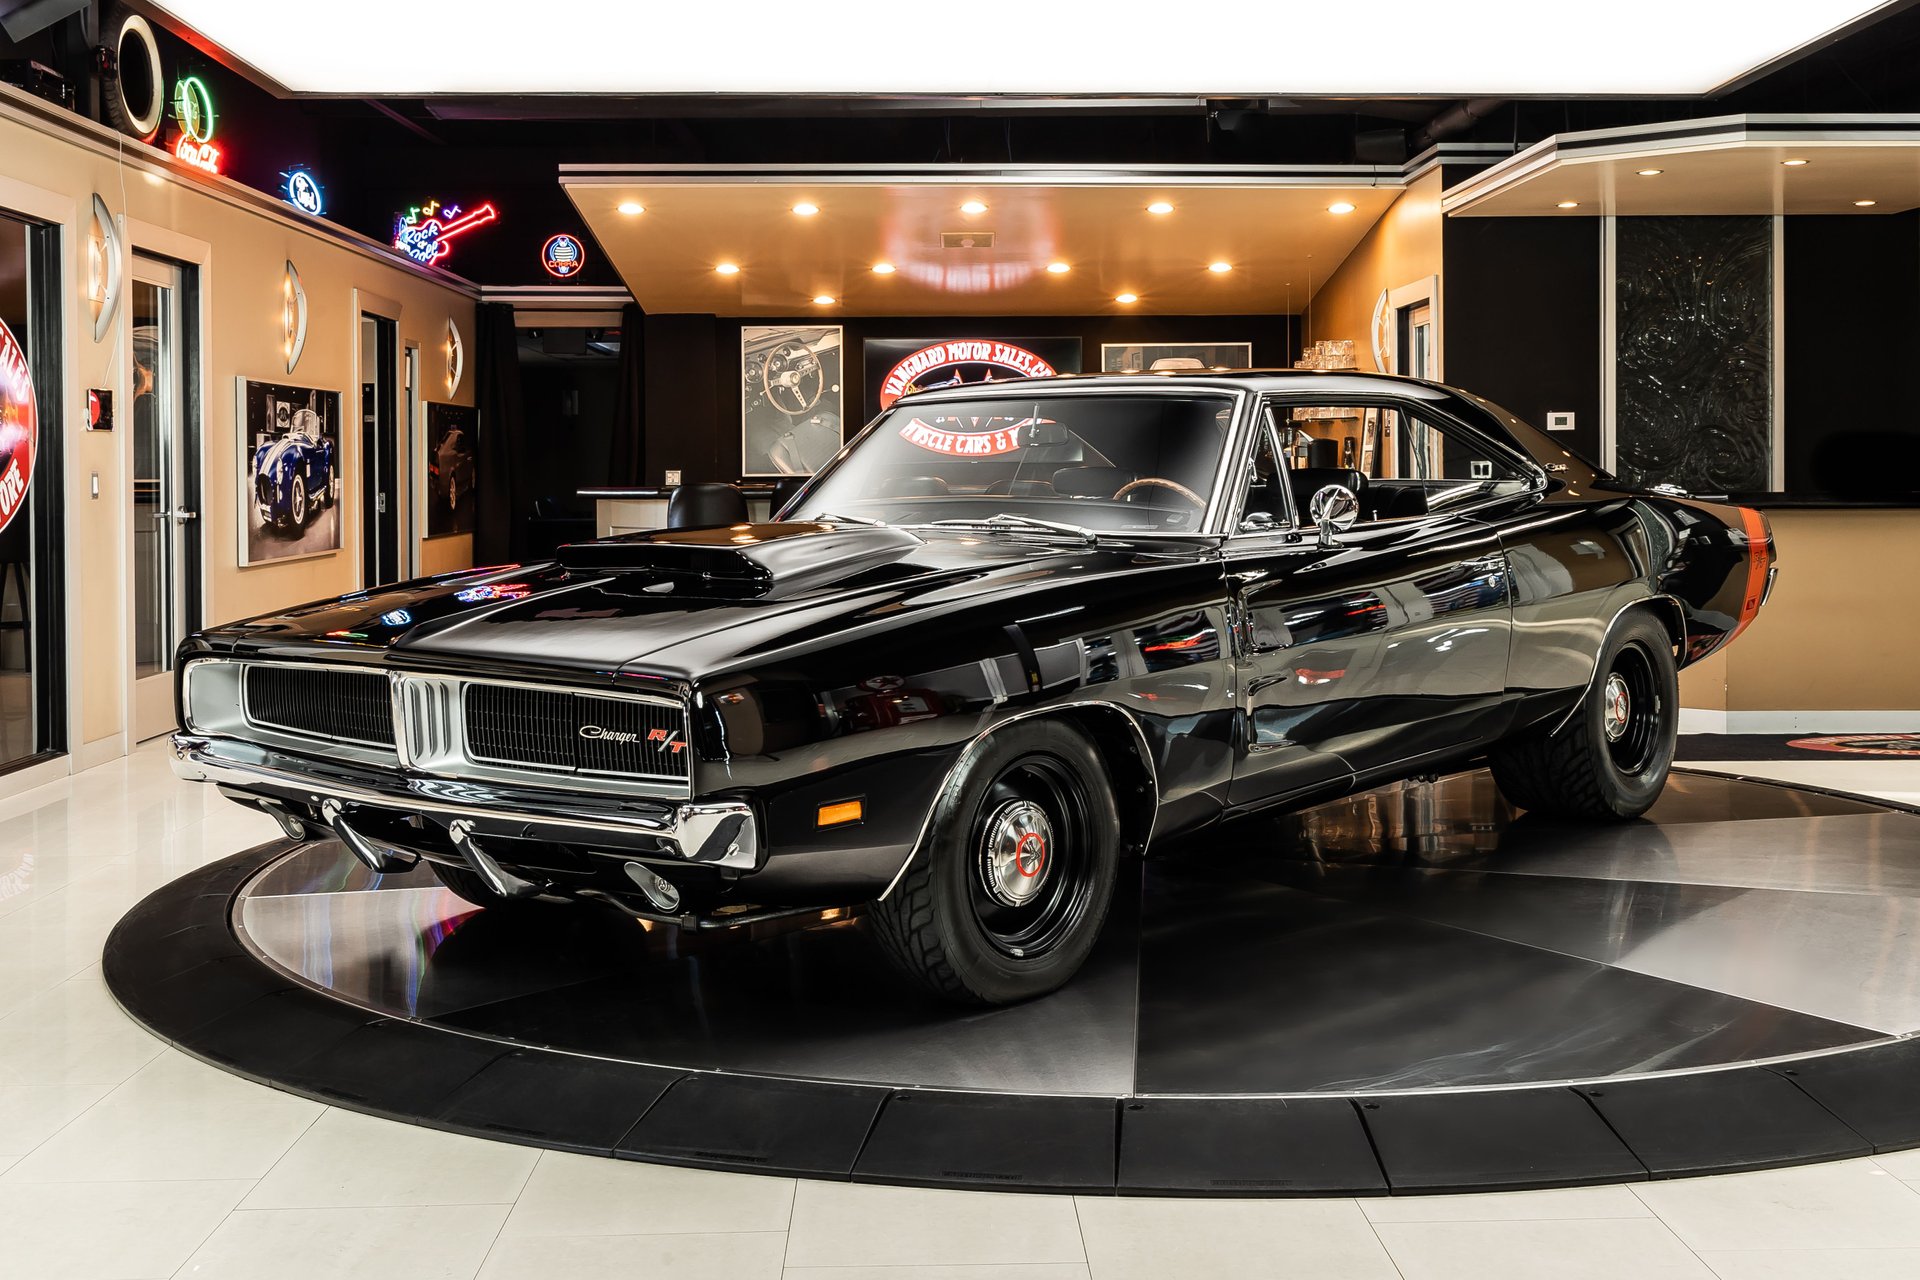 1969 Dodge Charger | Classic Cars for Sale Michigan: Muscle & Old Cars |  Vanguard Motor Sales